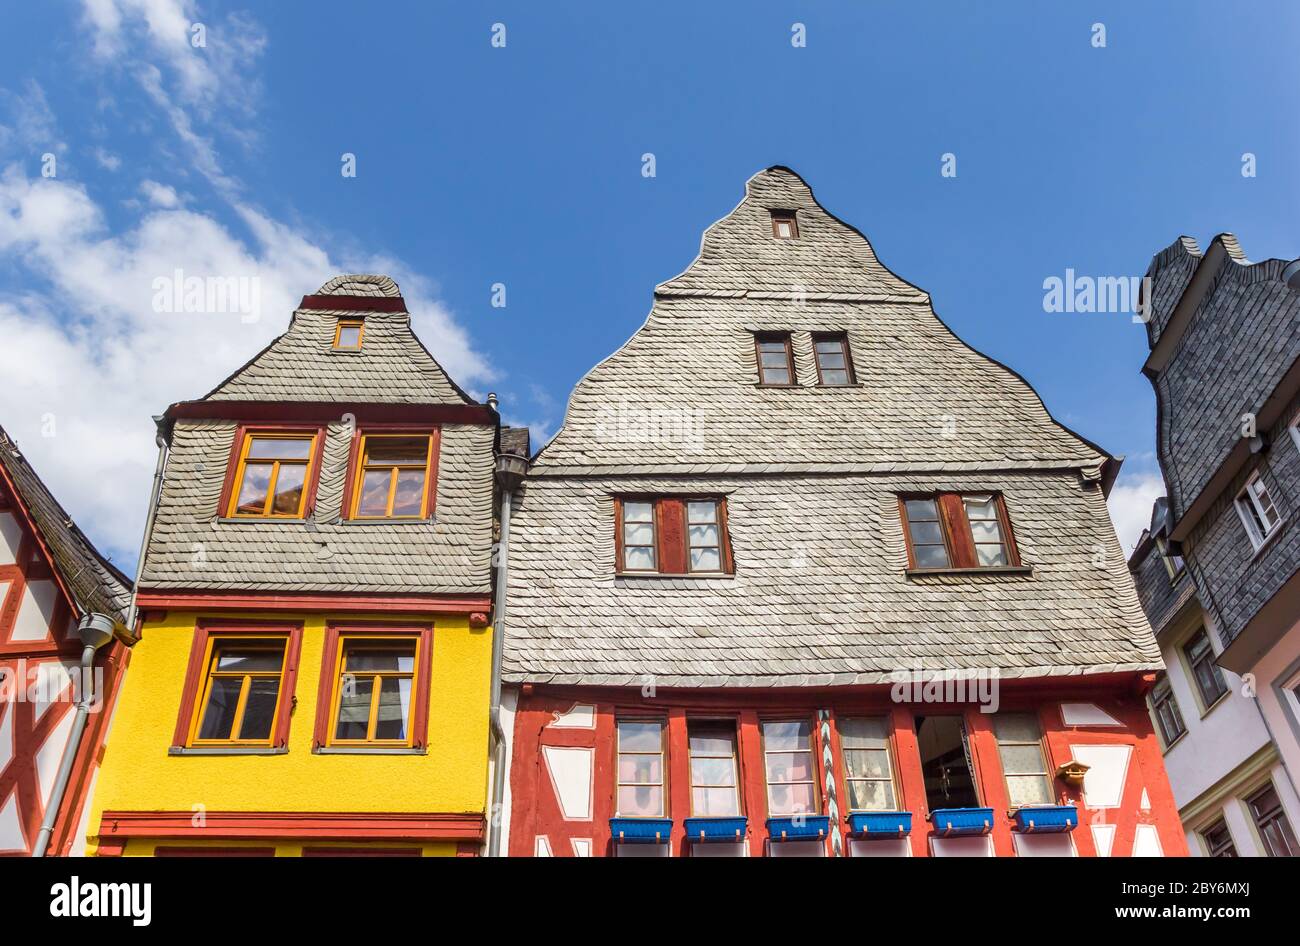 Facades of colorful houses in Limburg an der Lahn, Germany Stock Photo